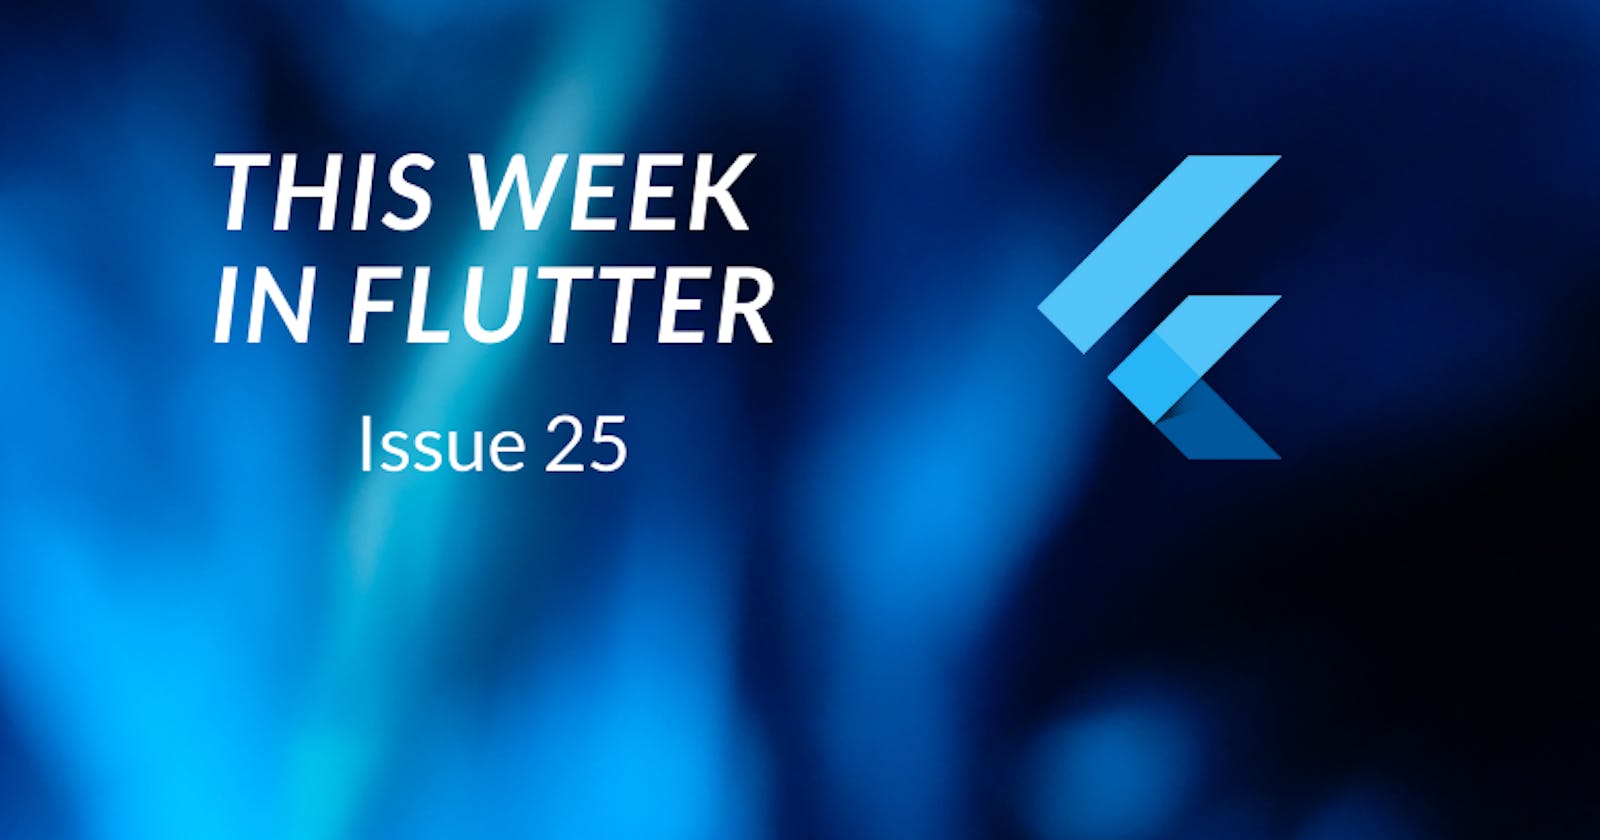 This week in Flutter #25